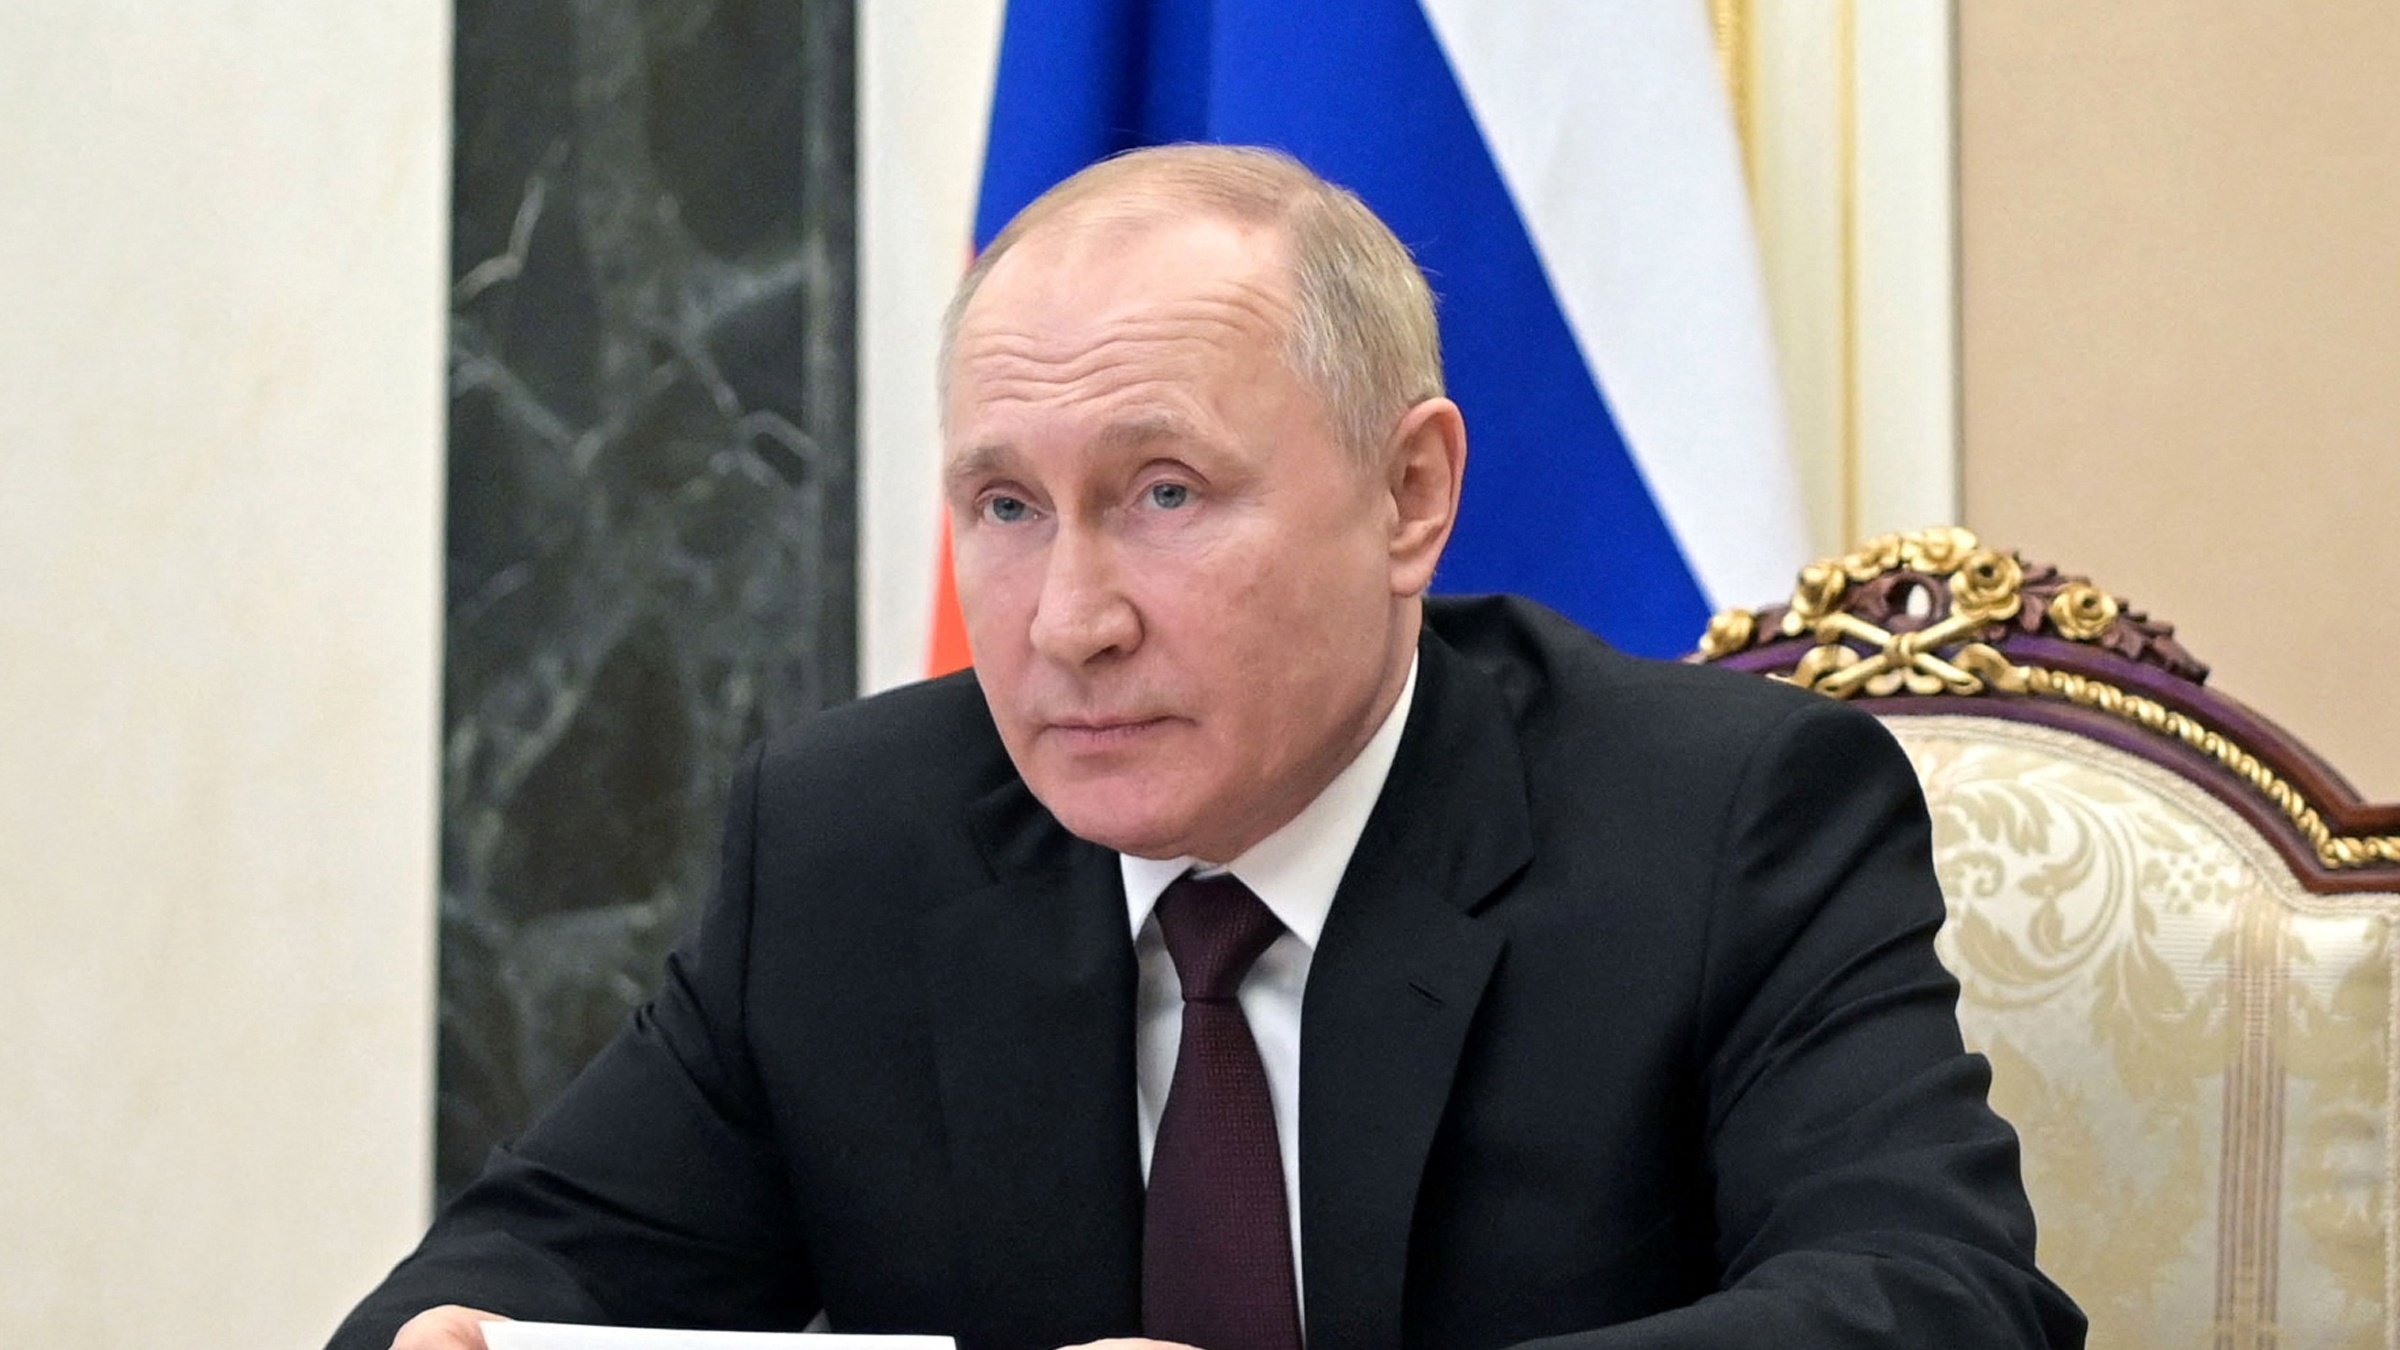 Vladimir Putin chairs a meeting of the Russian security council